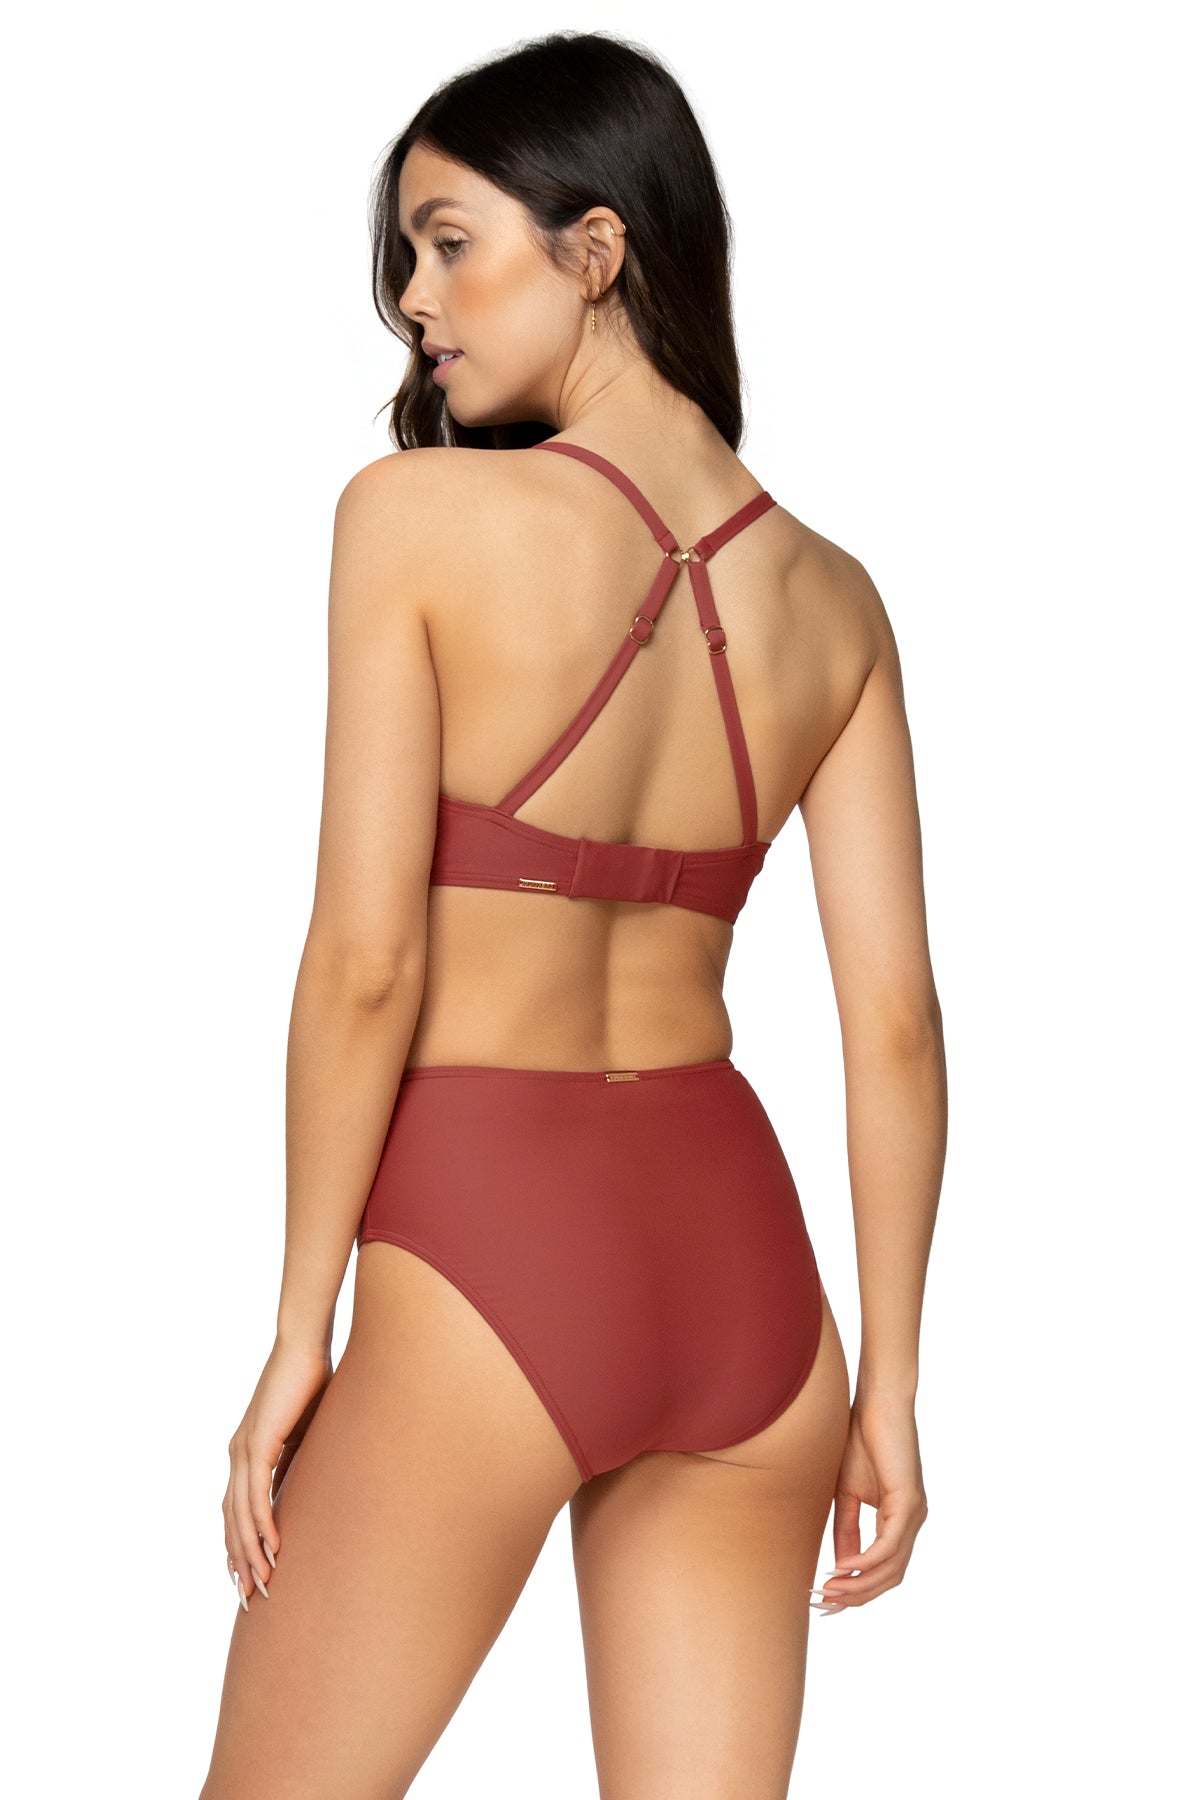 Back view of Sunsets Tuscan Red High Road Bottom with matching Kauai Keyhole bikini top showing crossback straps